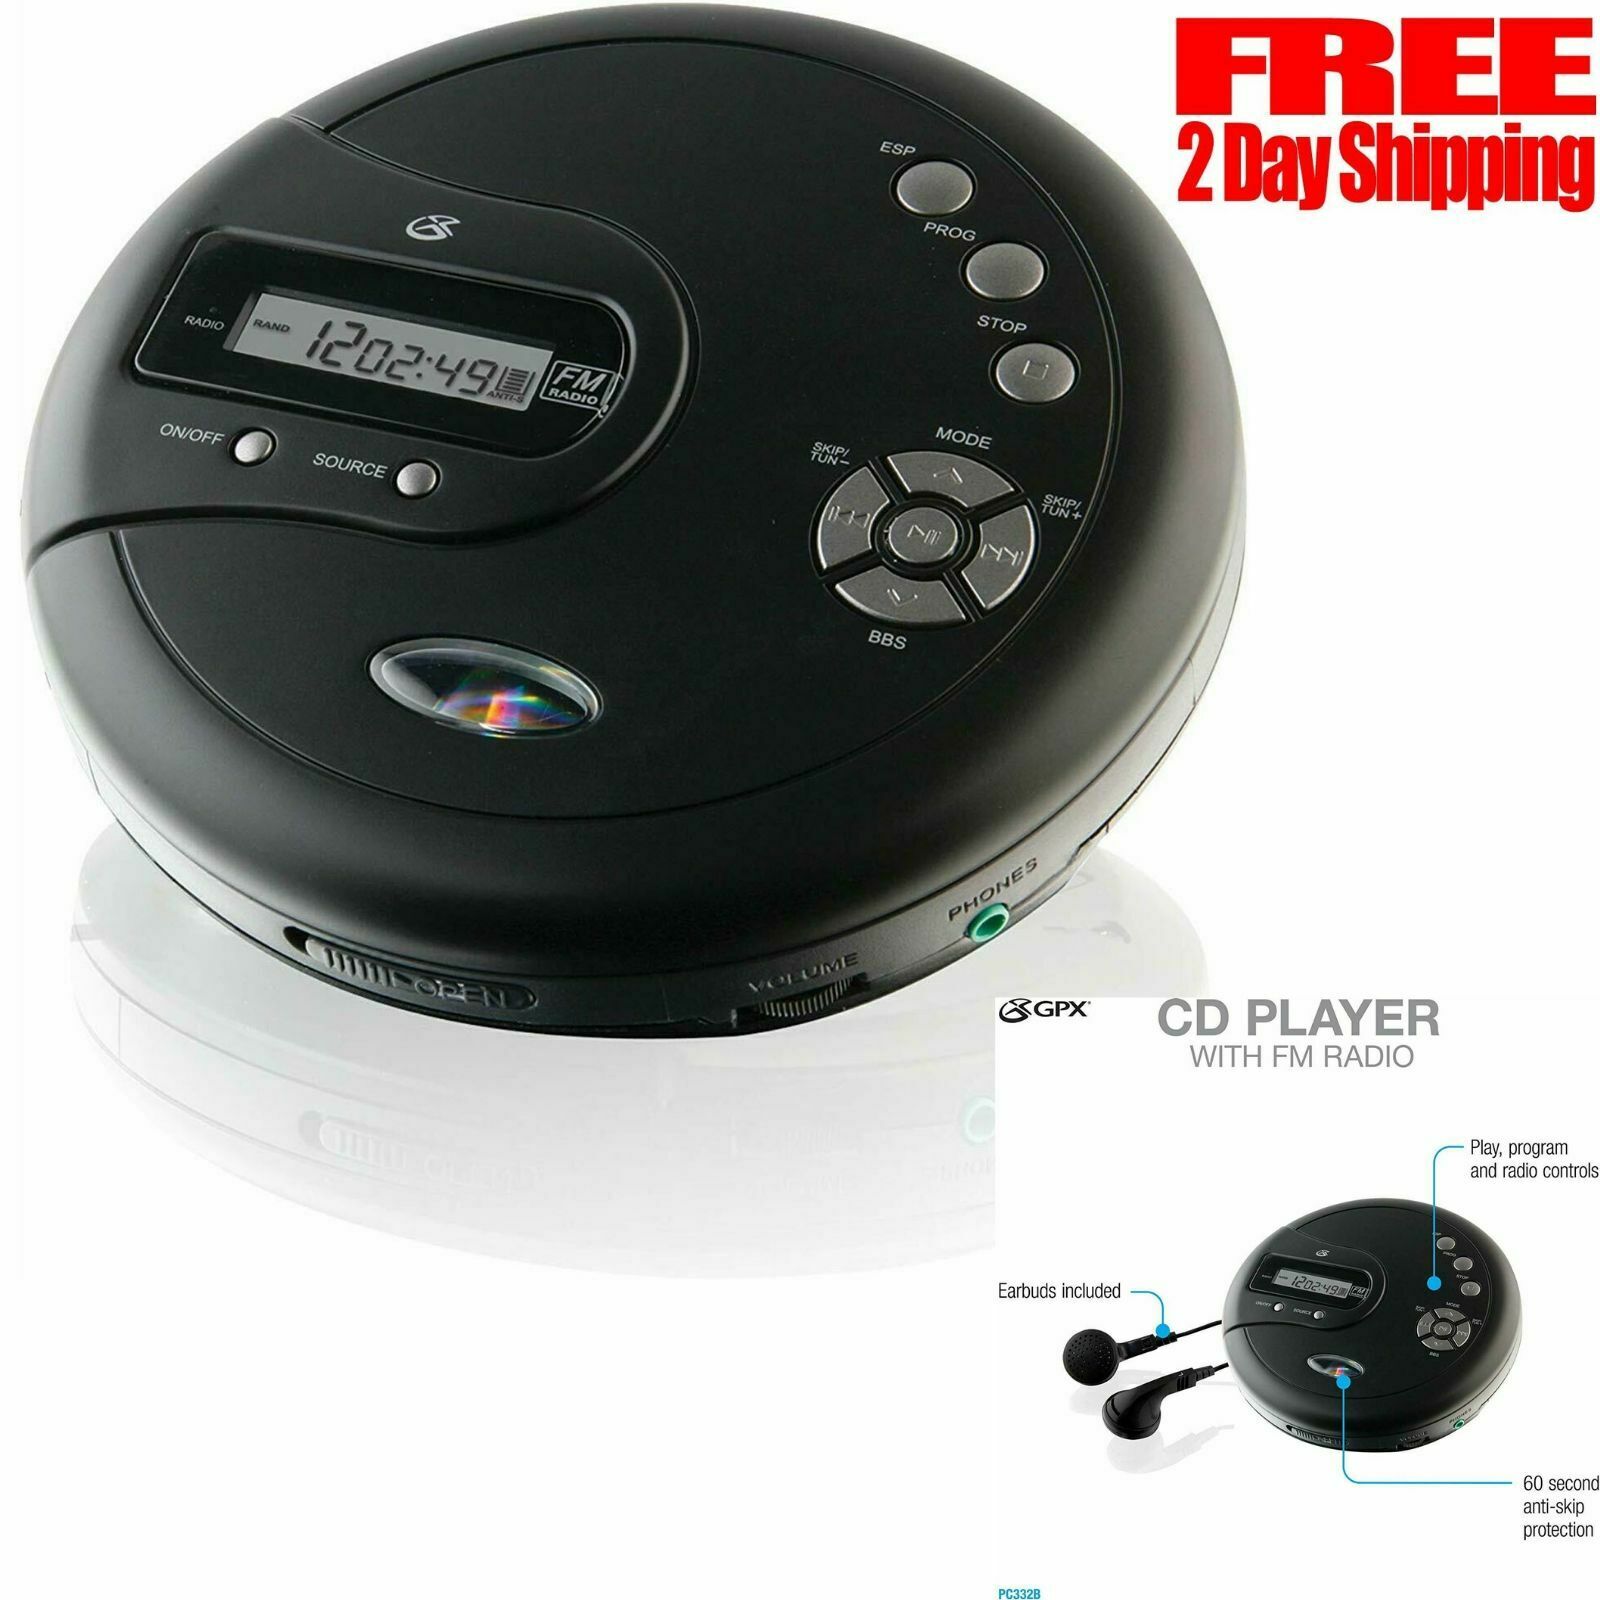 Cd Disk Player Portable With Bass Boost Anti-skip Protection Fm Radio Earbuds